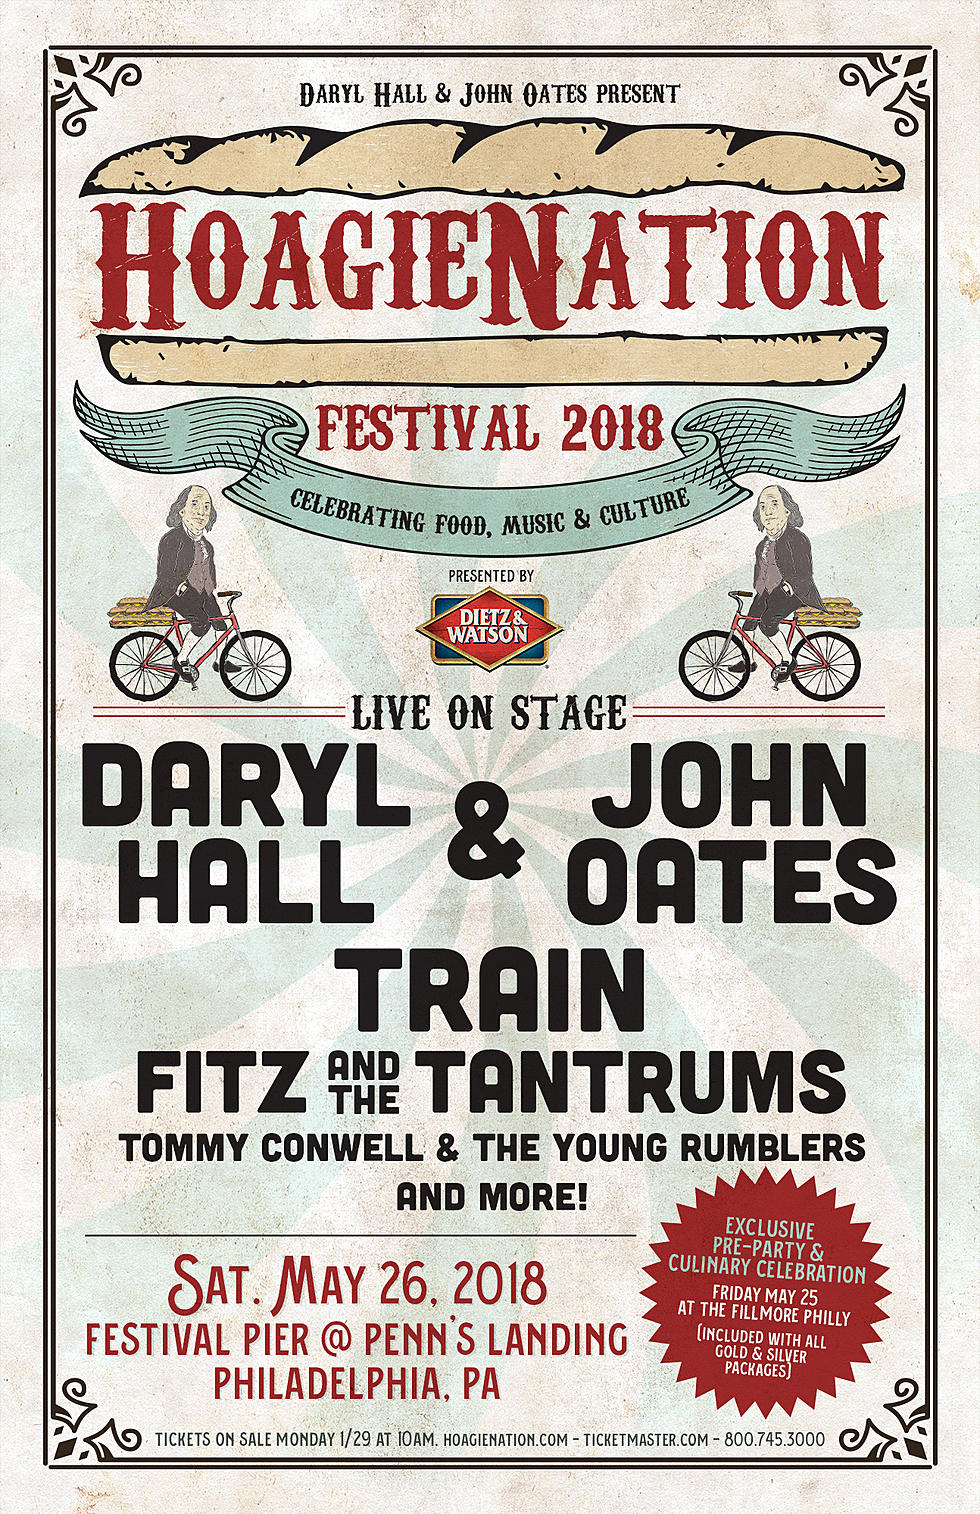 Daryl Hall and John Oates Are Back With Hoagienation Festival 201